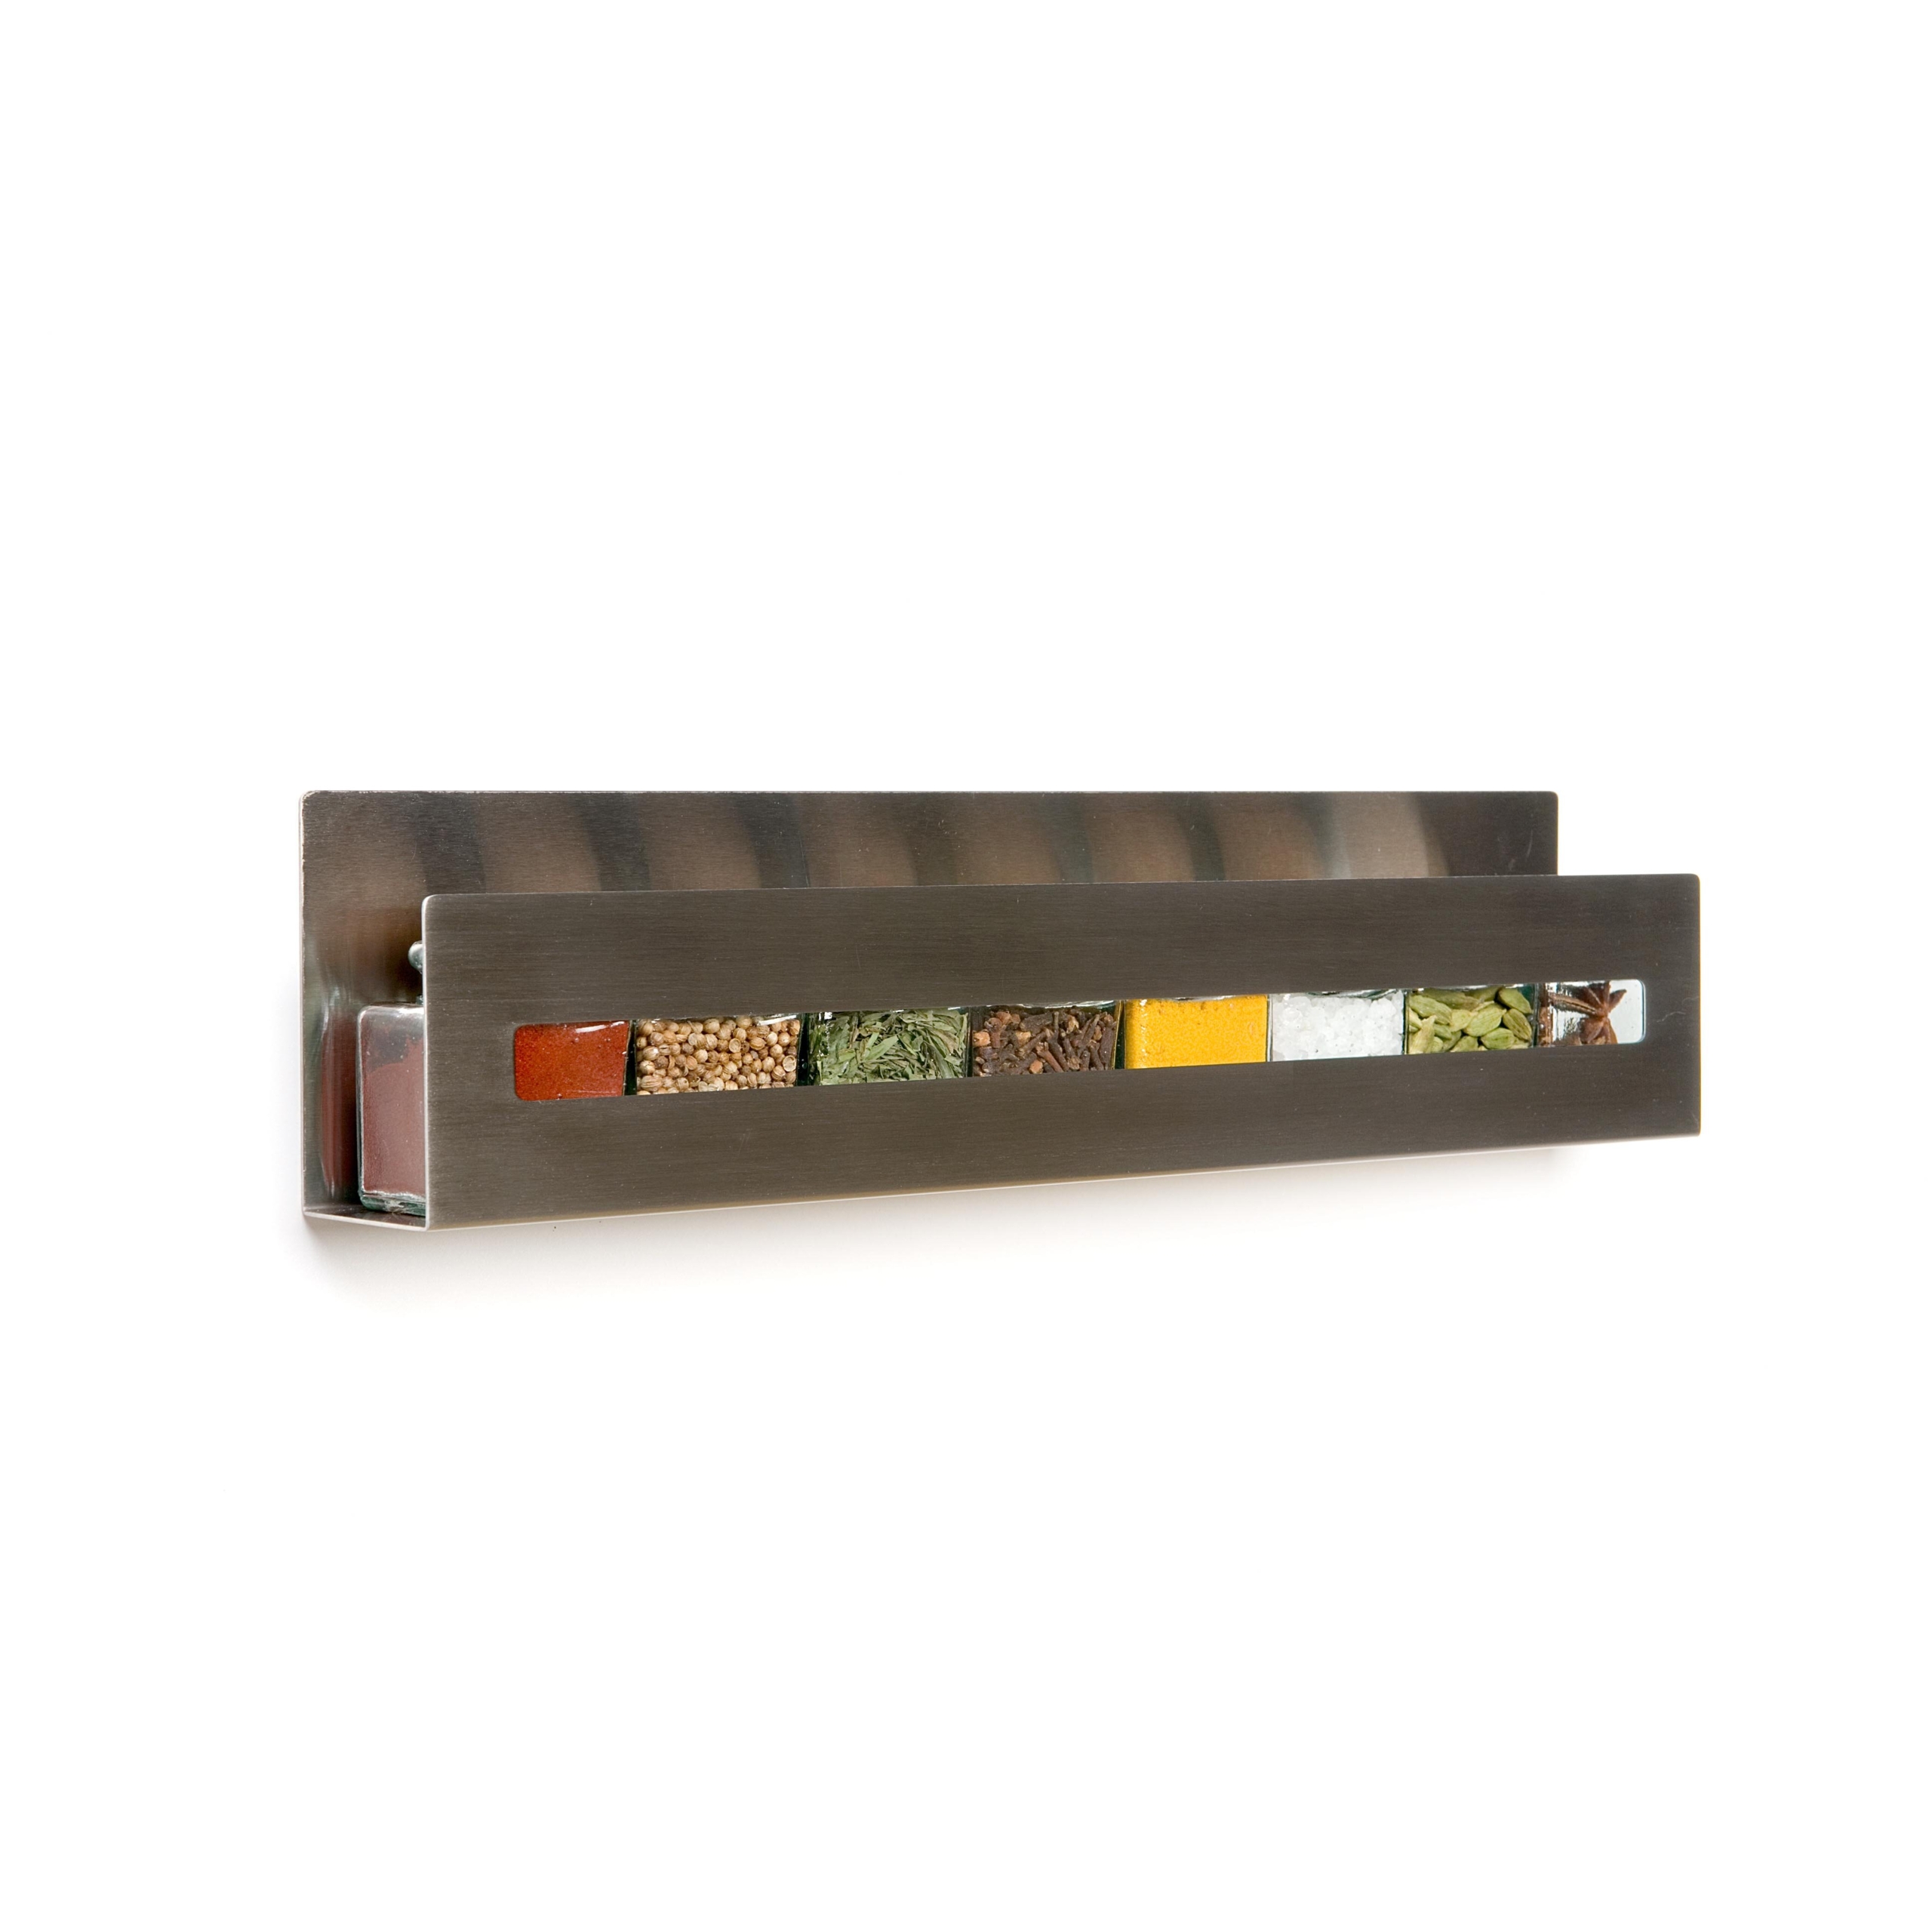 Spice rack stainless steel wall mounted